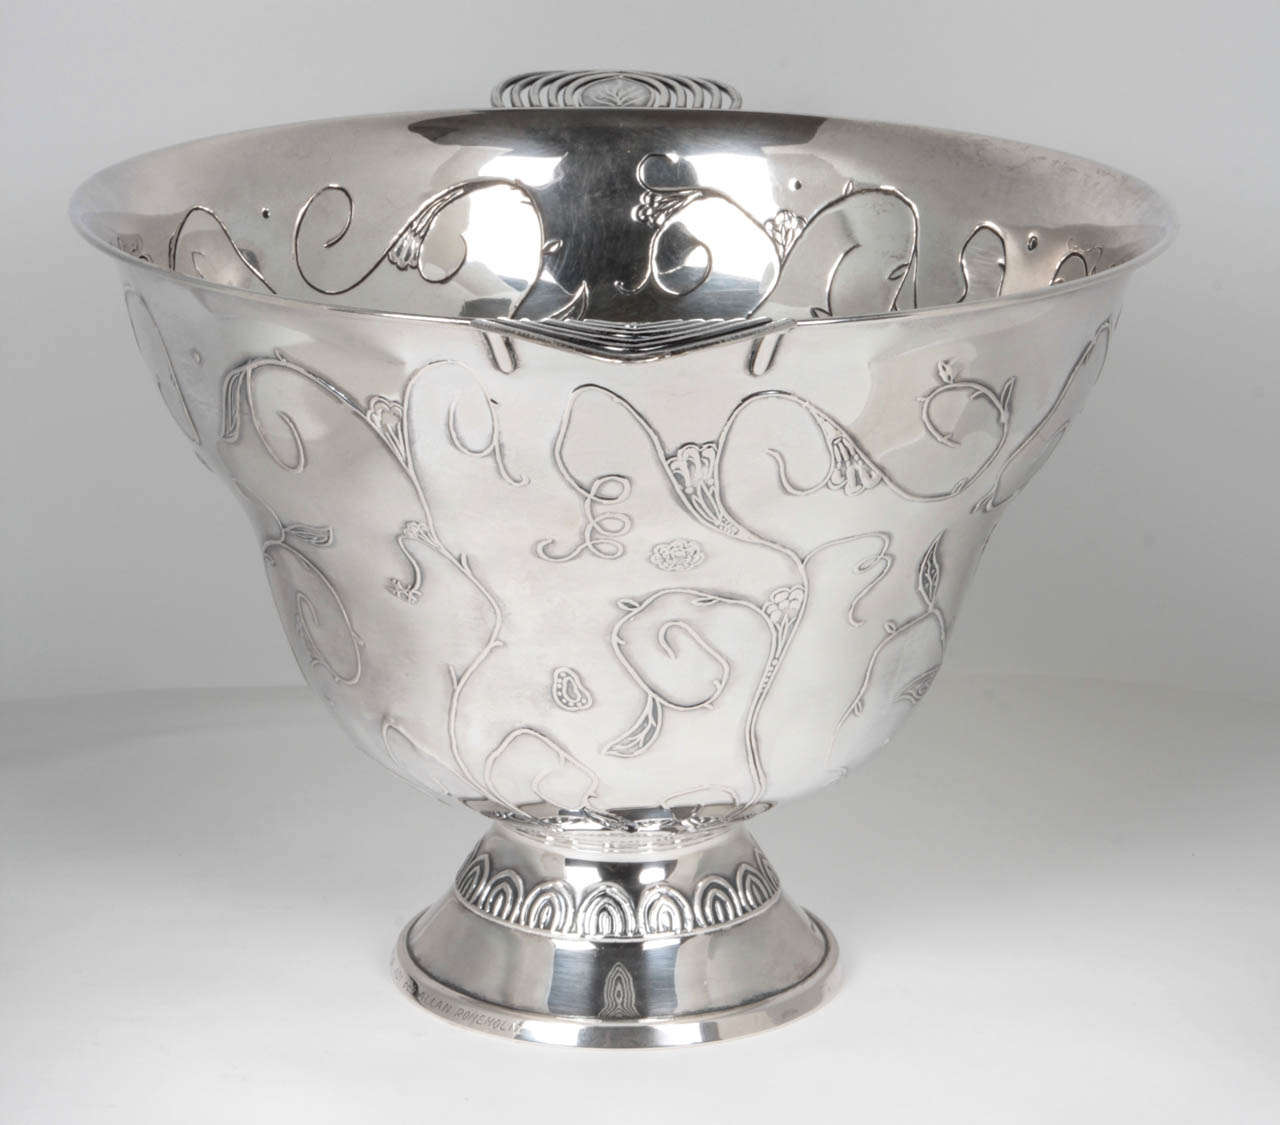 SUOMEN KULTASEPPÄ OY  Turku, Finland  
(FINNISH GOLDSMITH COMPANY, LTD.)

Silver bowl   1925

Hand wrought and repoussé silver with an overall scrolling leaf, blossom and vine motif, applied stylized open work silver handles 

Marks: 